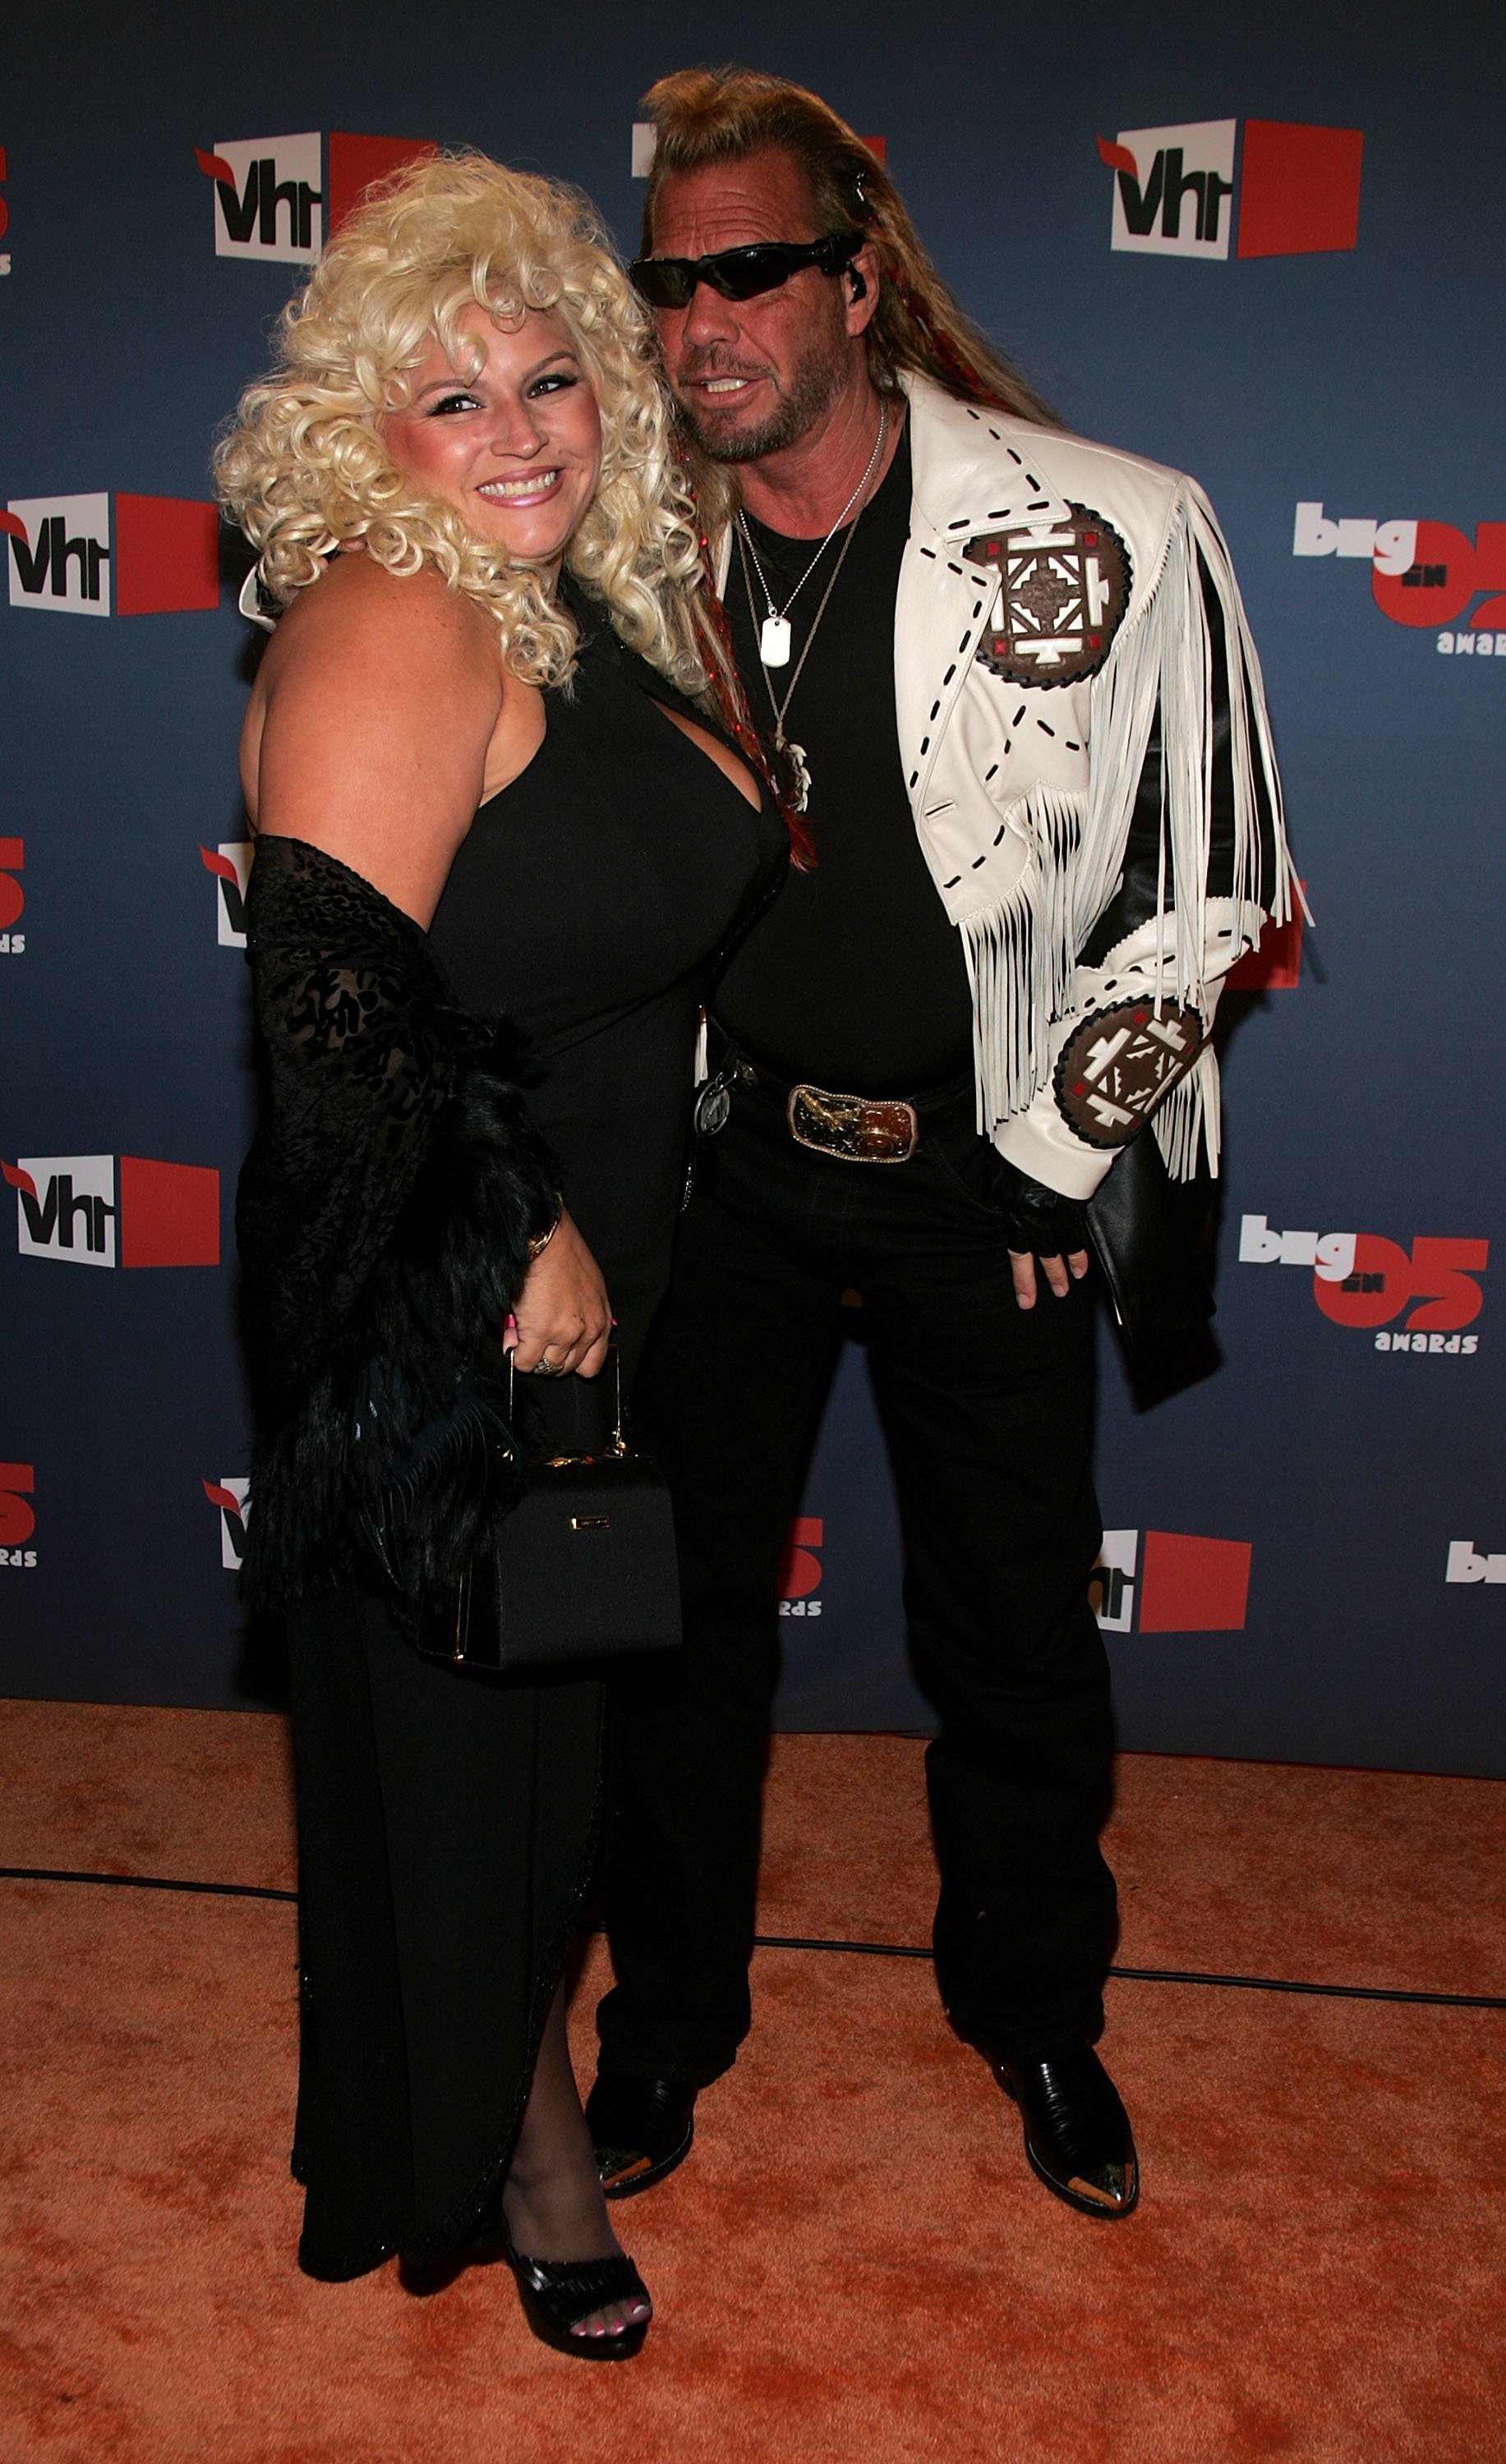 Bounty Hunter Duane "Dog" Chapman and Beth Chapman at the VH1 Big In '05 Awards on December 3, 2005 | Photo: Getty Images